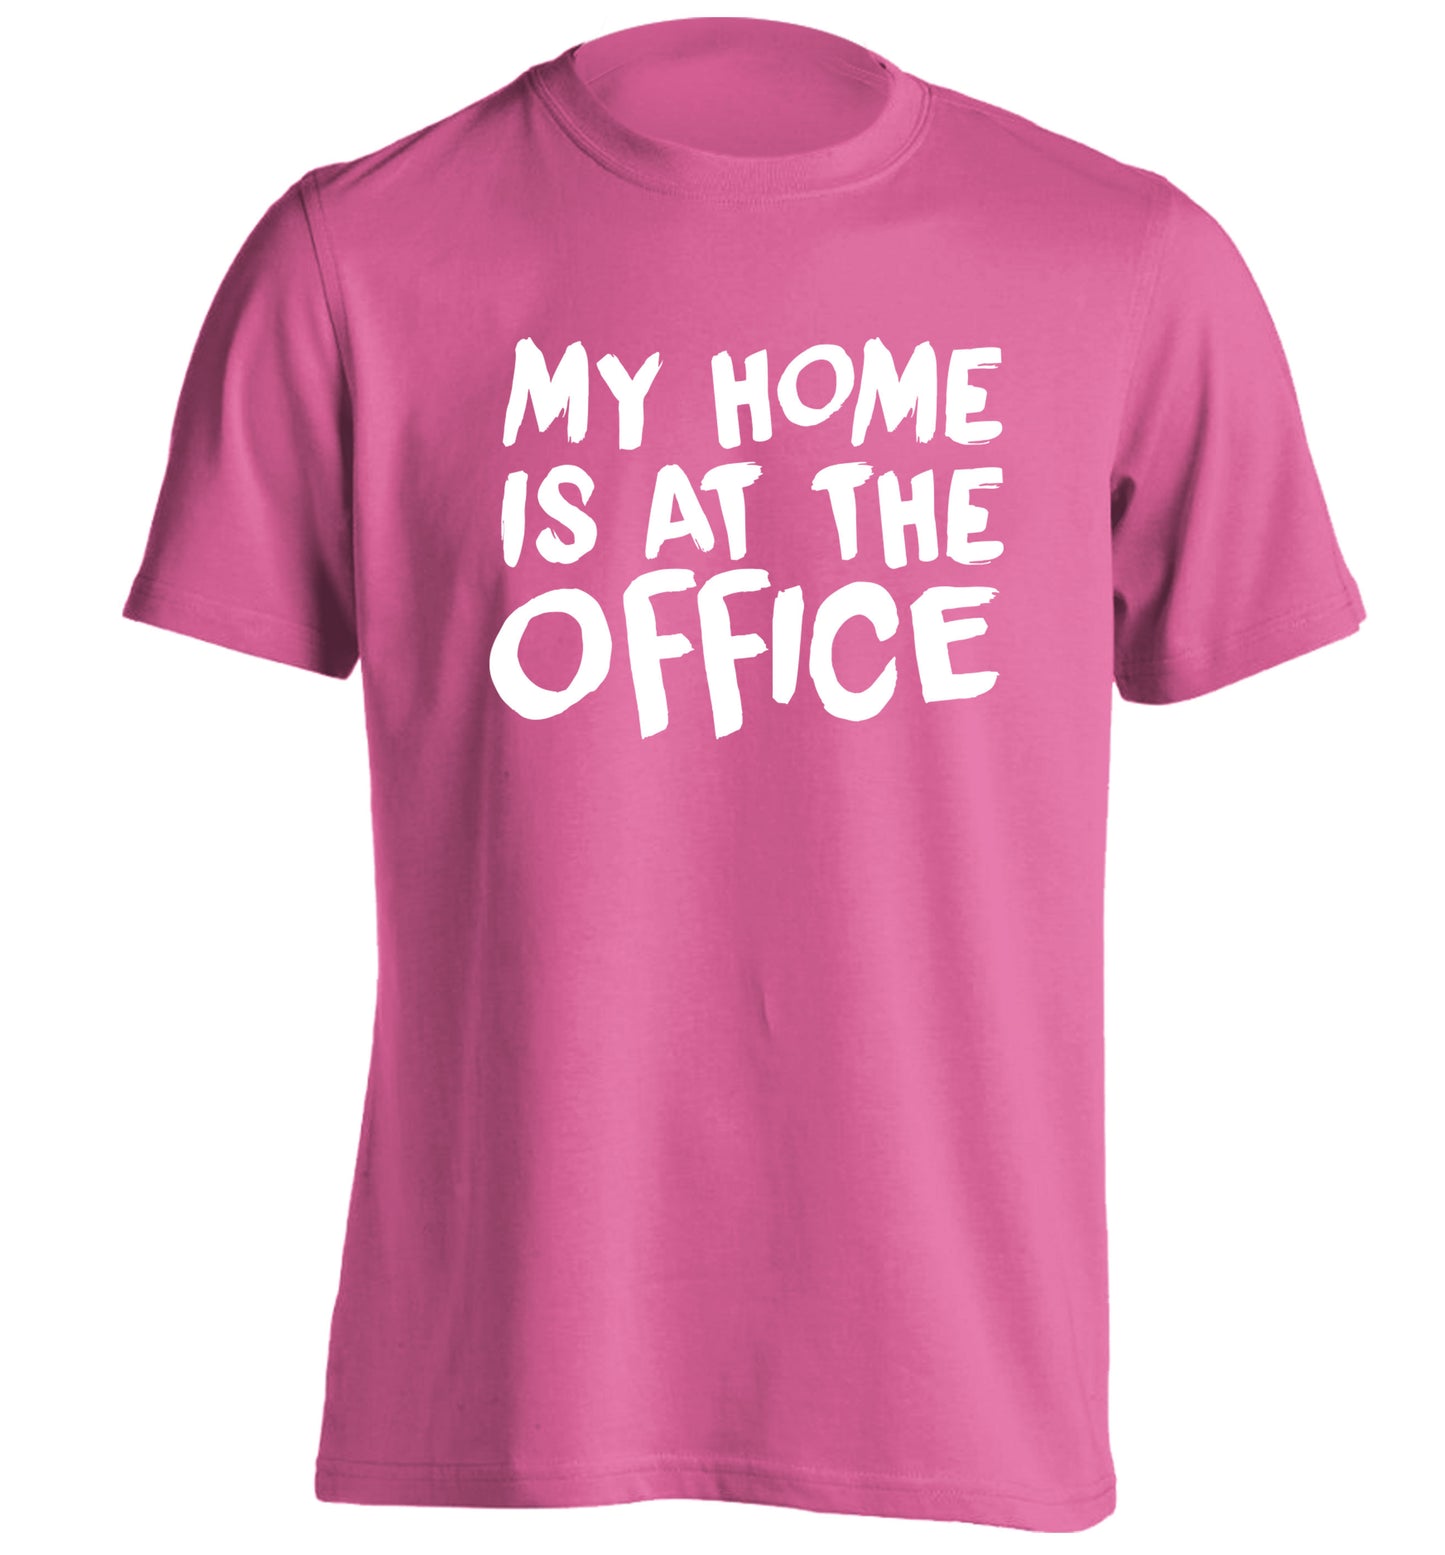 My home is at the office adults unisex pink Tshirt 2XL